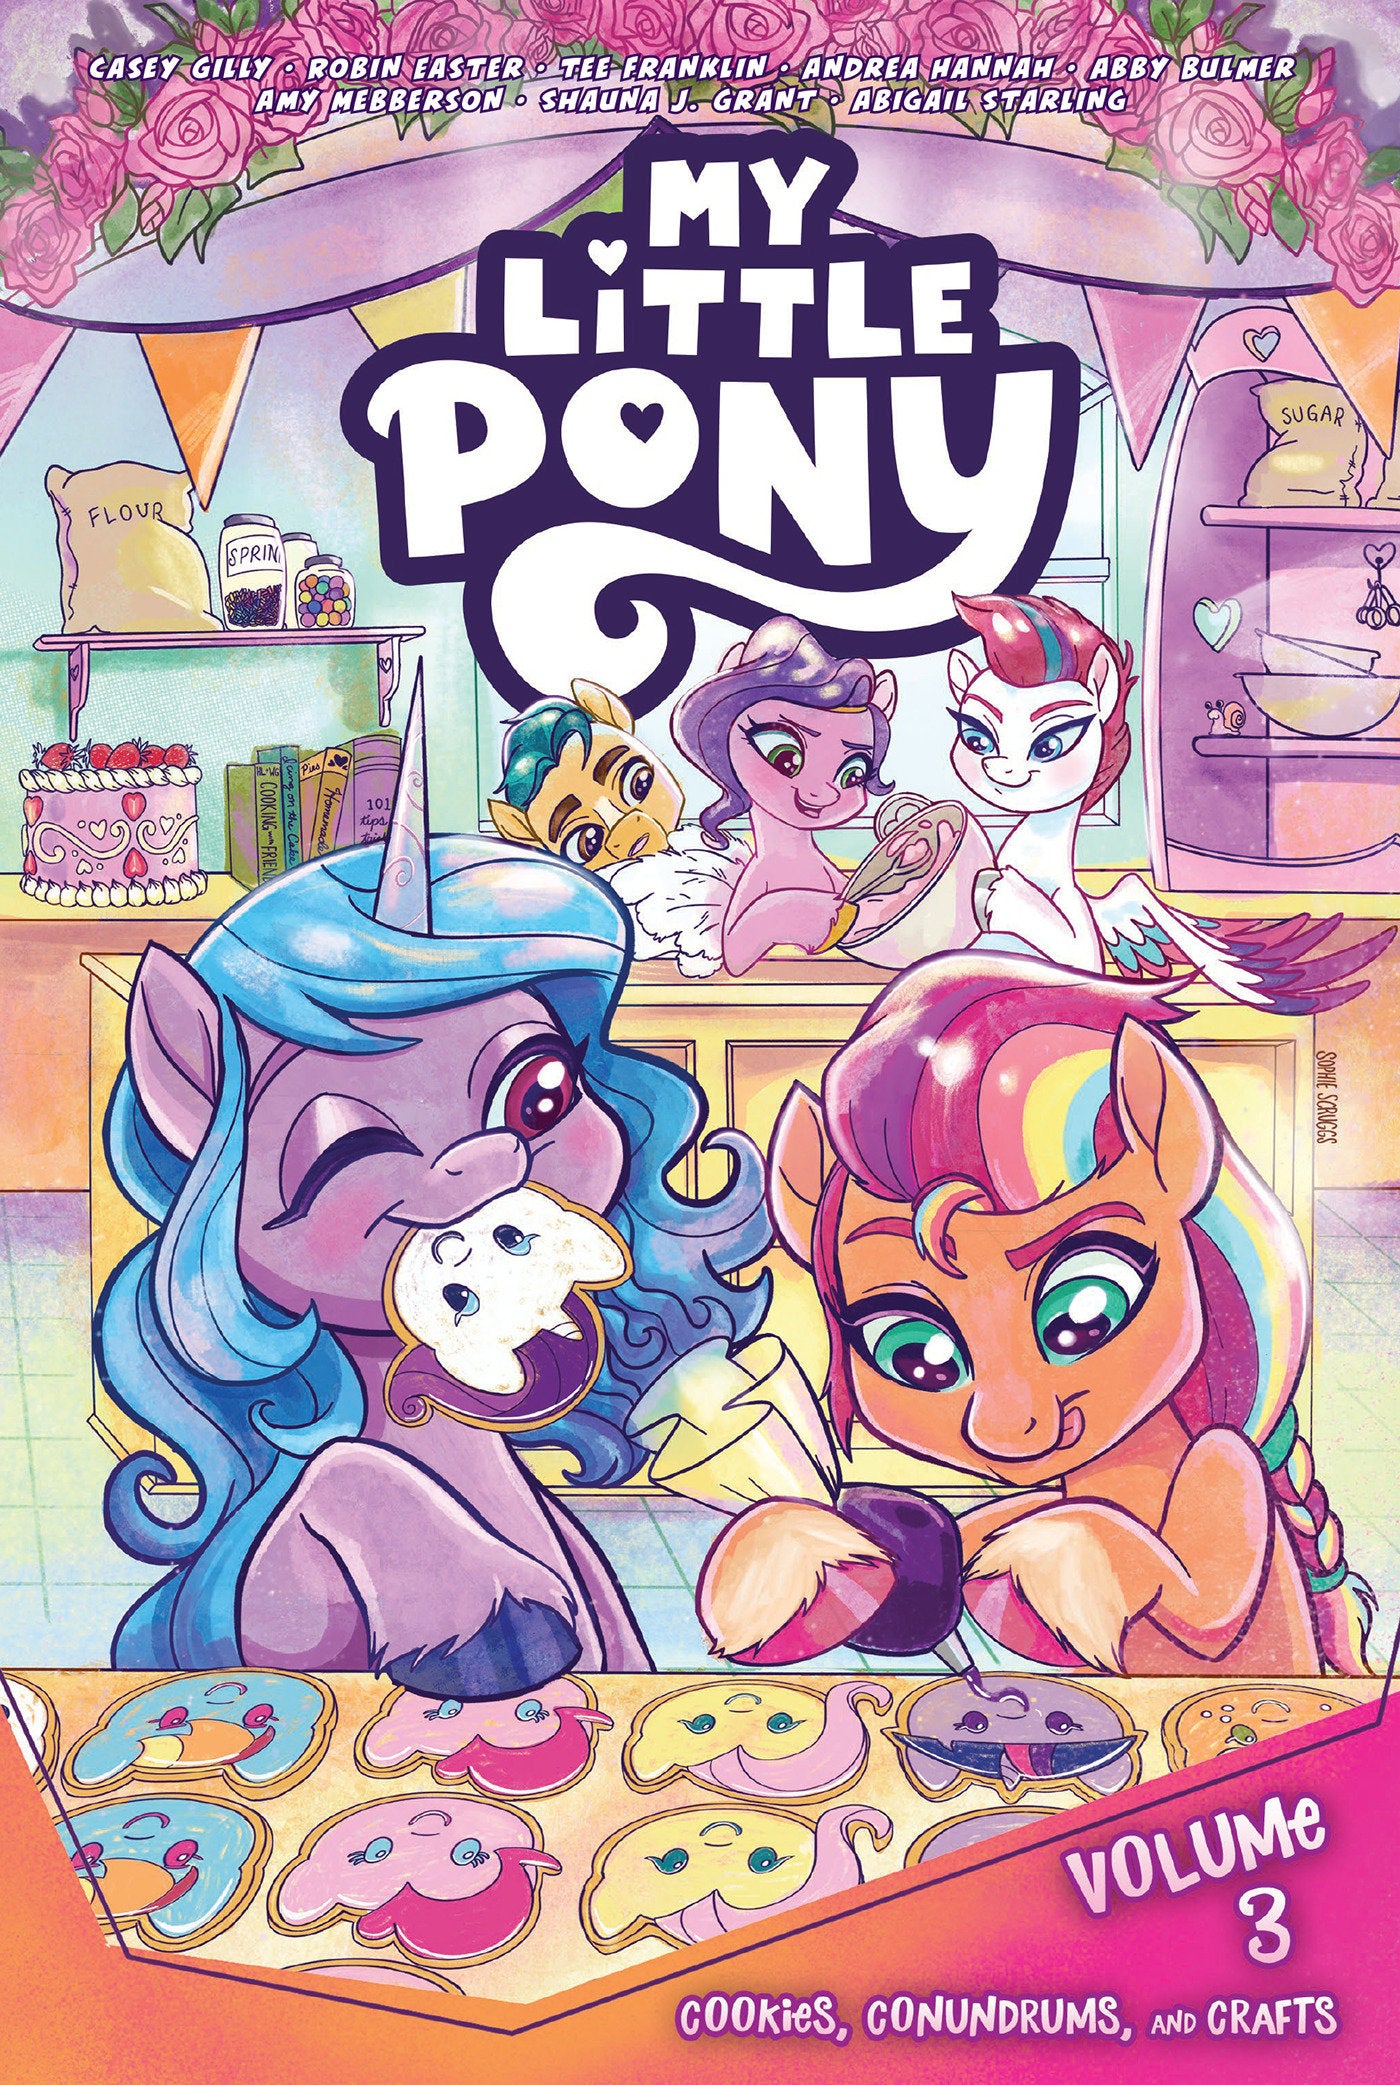 My Little Pony, Volume. 3: Cookies, Conundrums, And Crafts | L.A. Mood Comics and Games